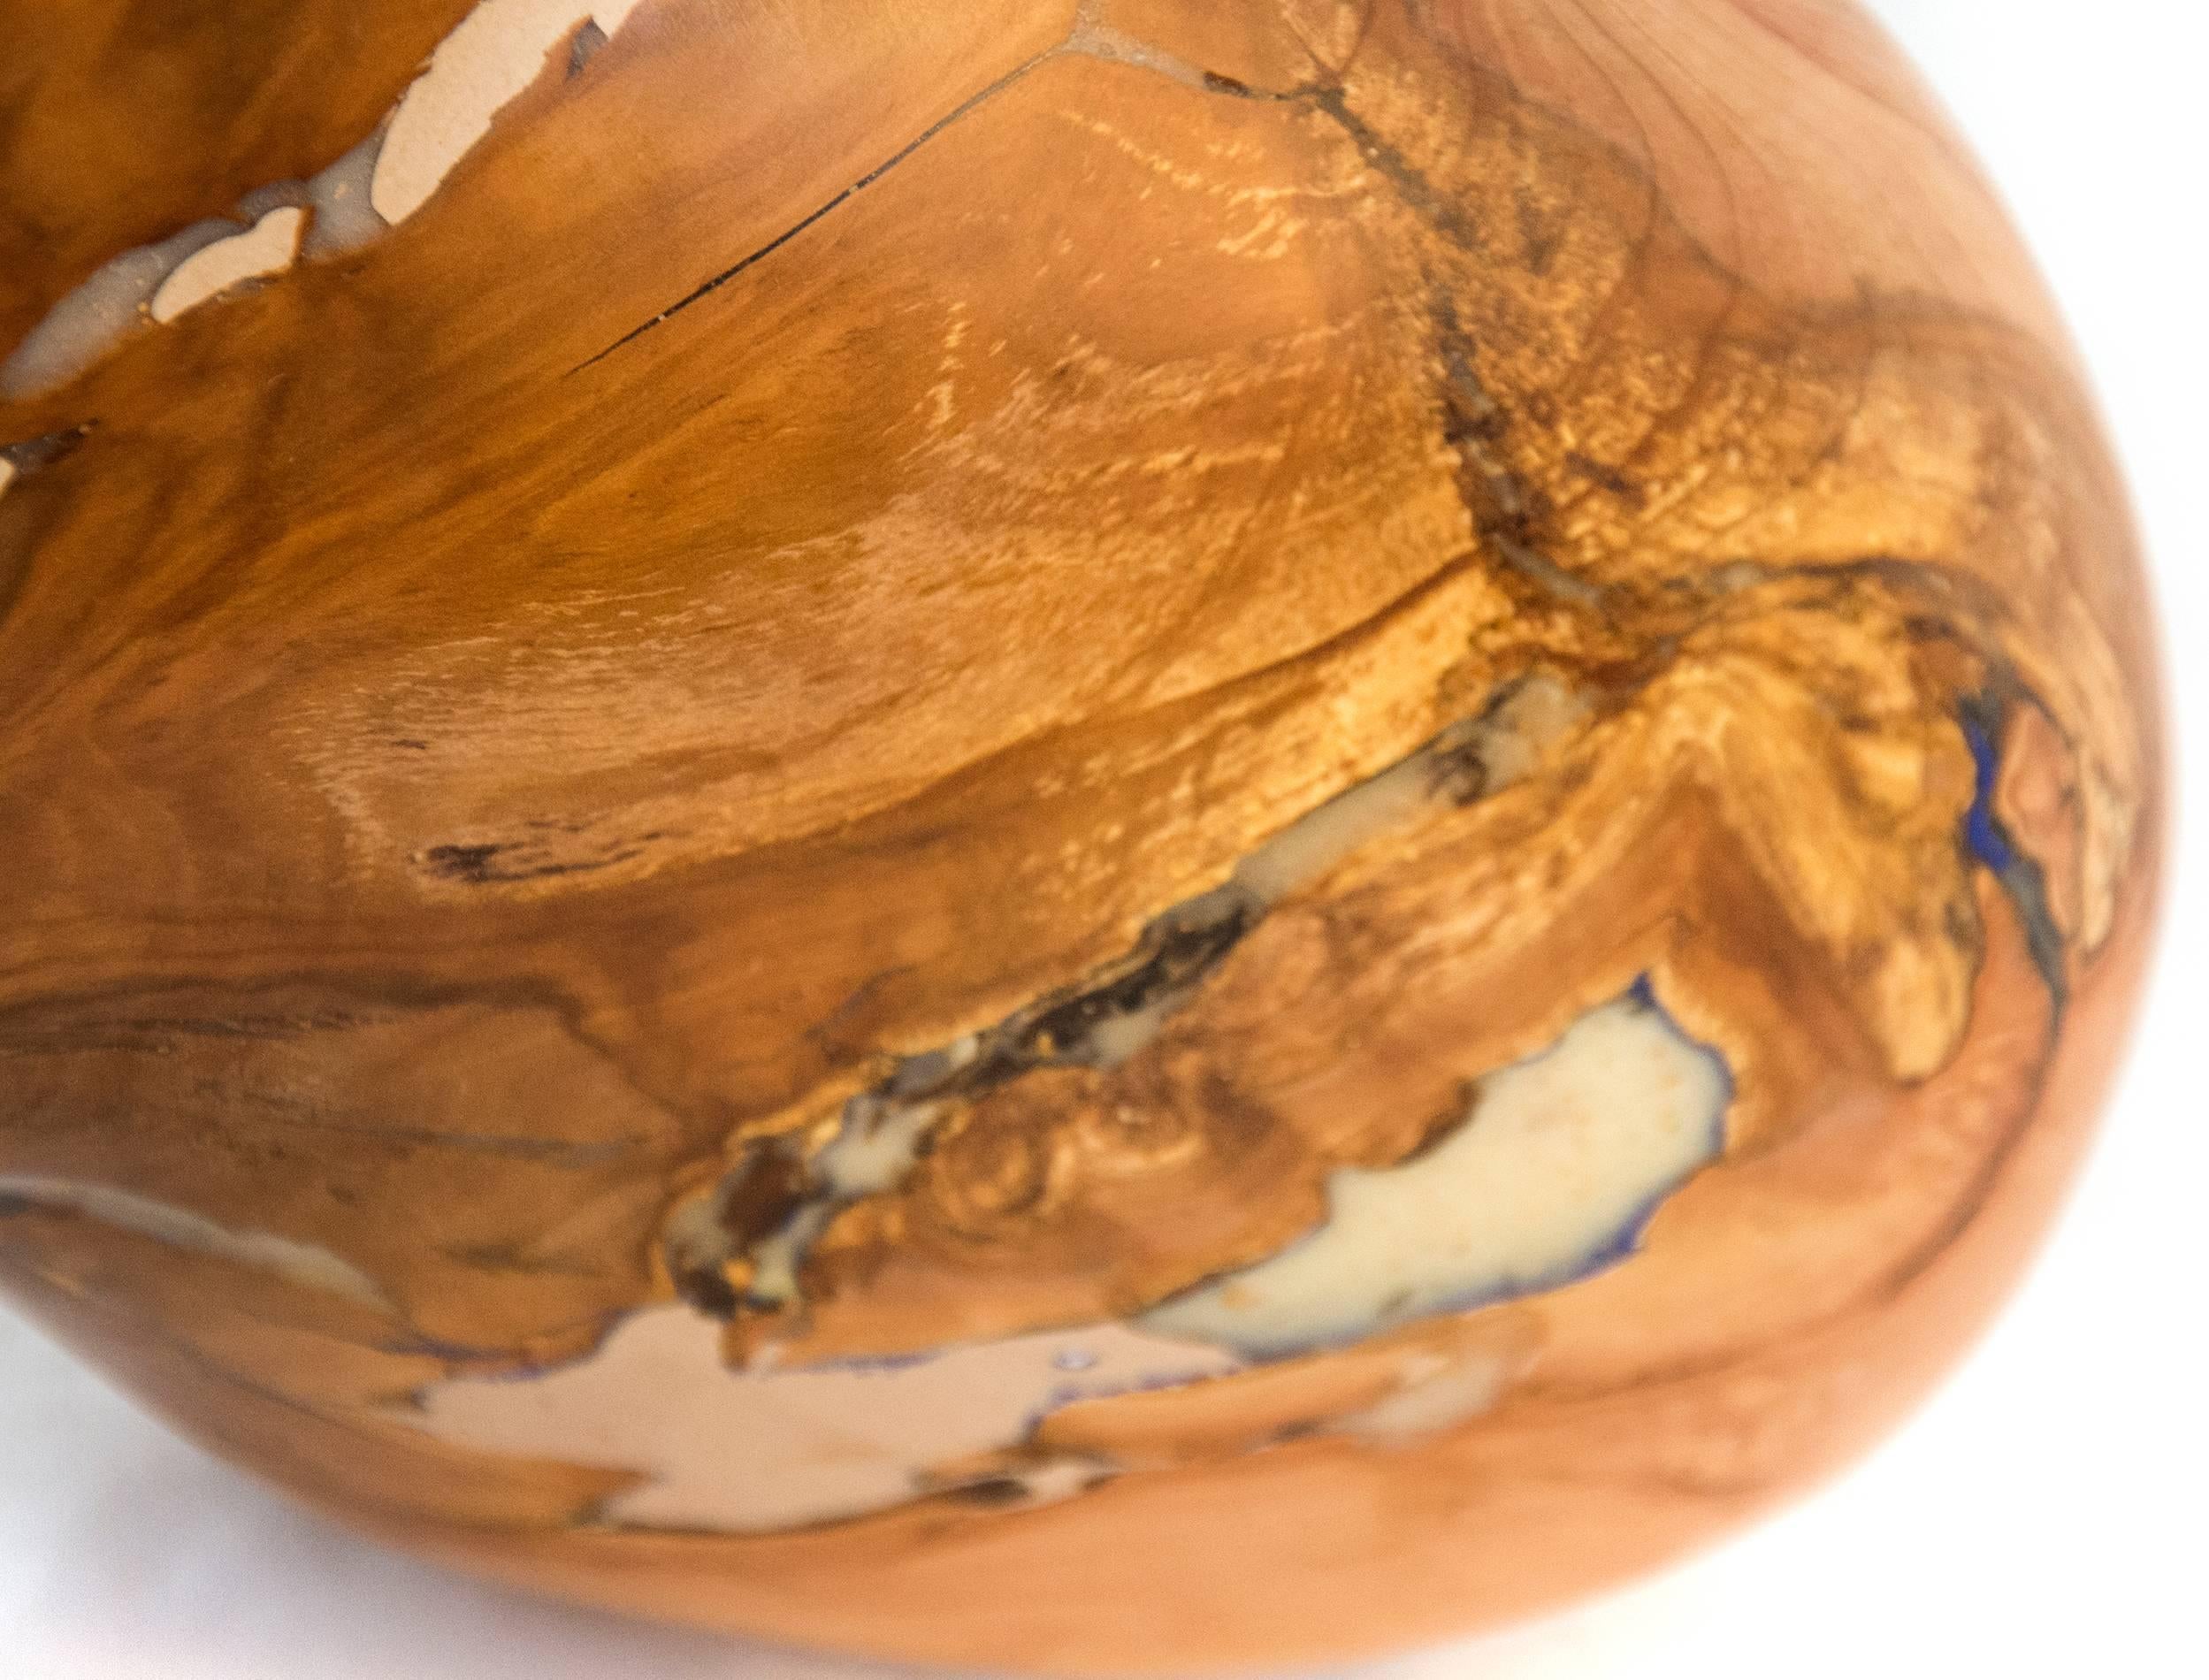 This abstract sculpture from the Windfall Series by Shayne Dark is made from one of the applewood burls collected from apple orchards in Prince Edward County, Ontario. Many of the local apple orchardists were paid by the government to cut down their